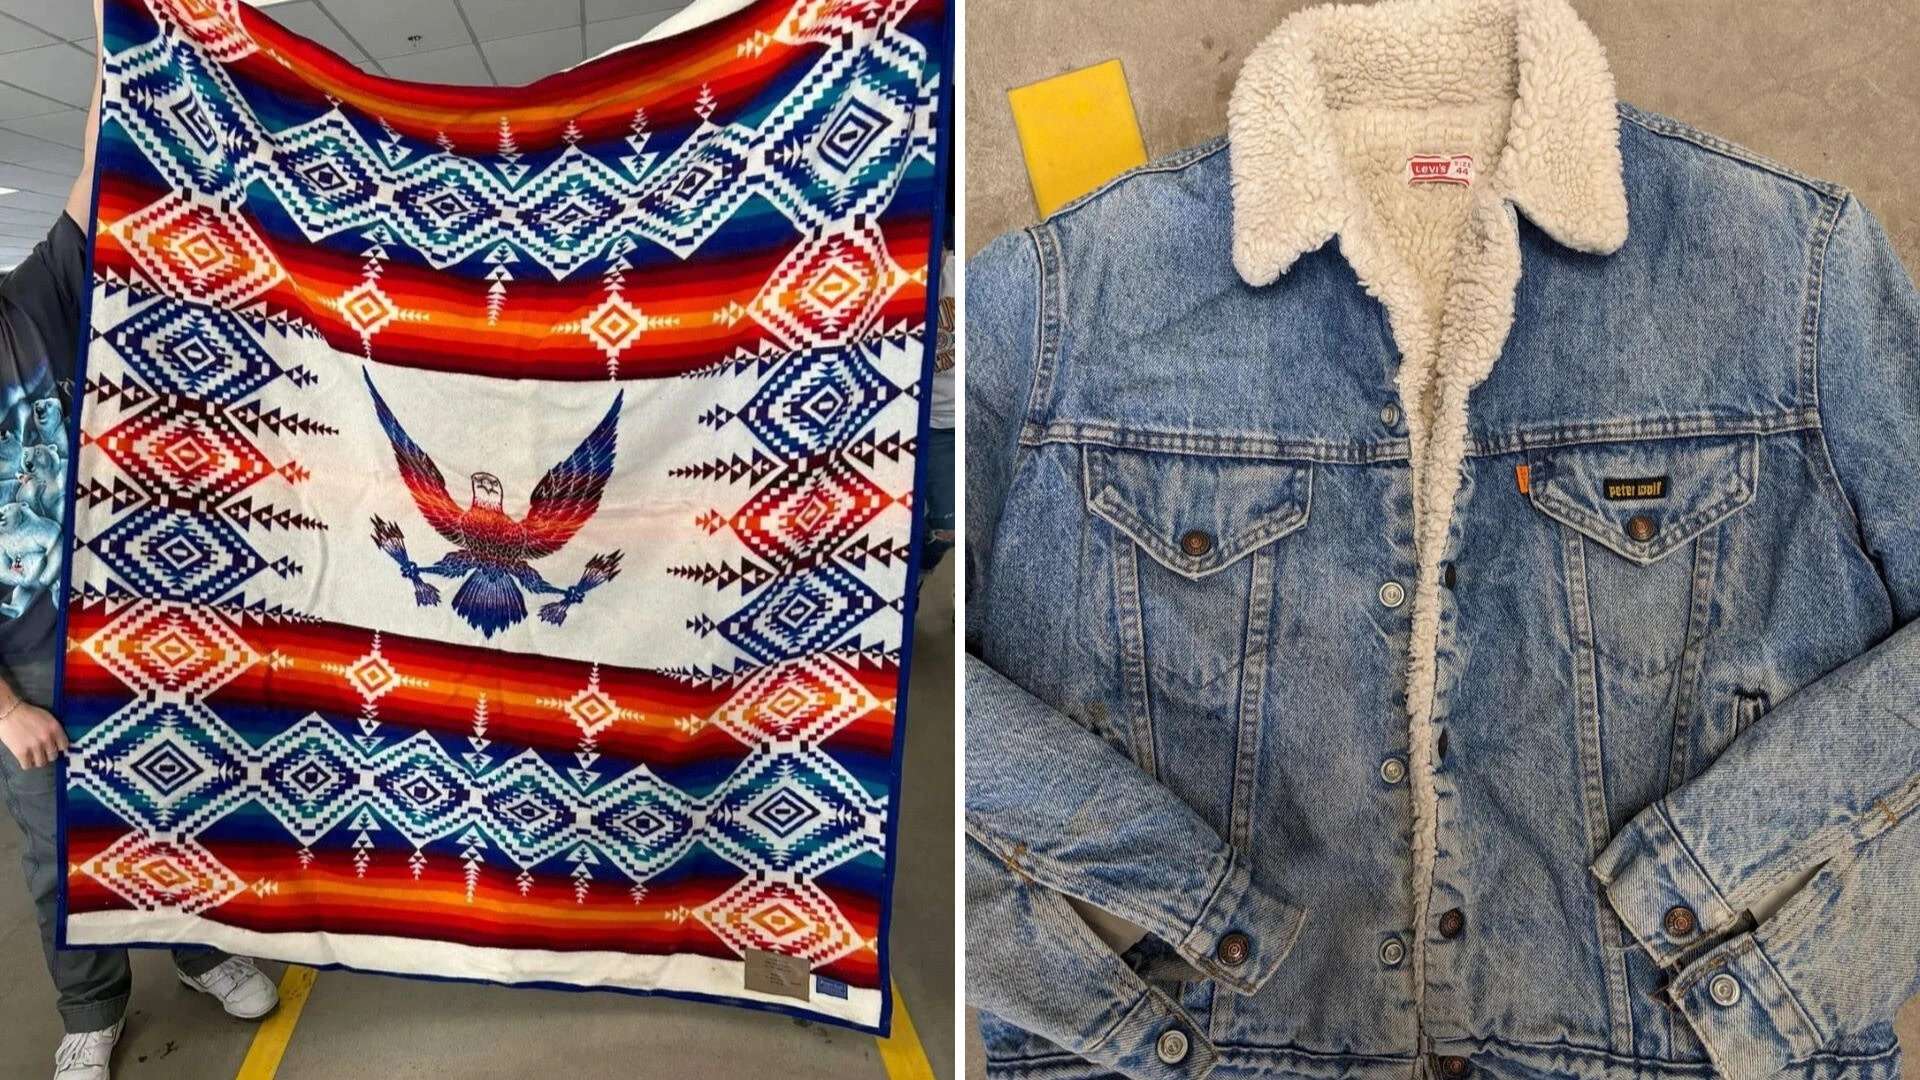 Muskuløs Mona Lisa Afspejling Shopper finds rare Patagonia clothing and more for cheap